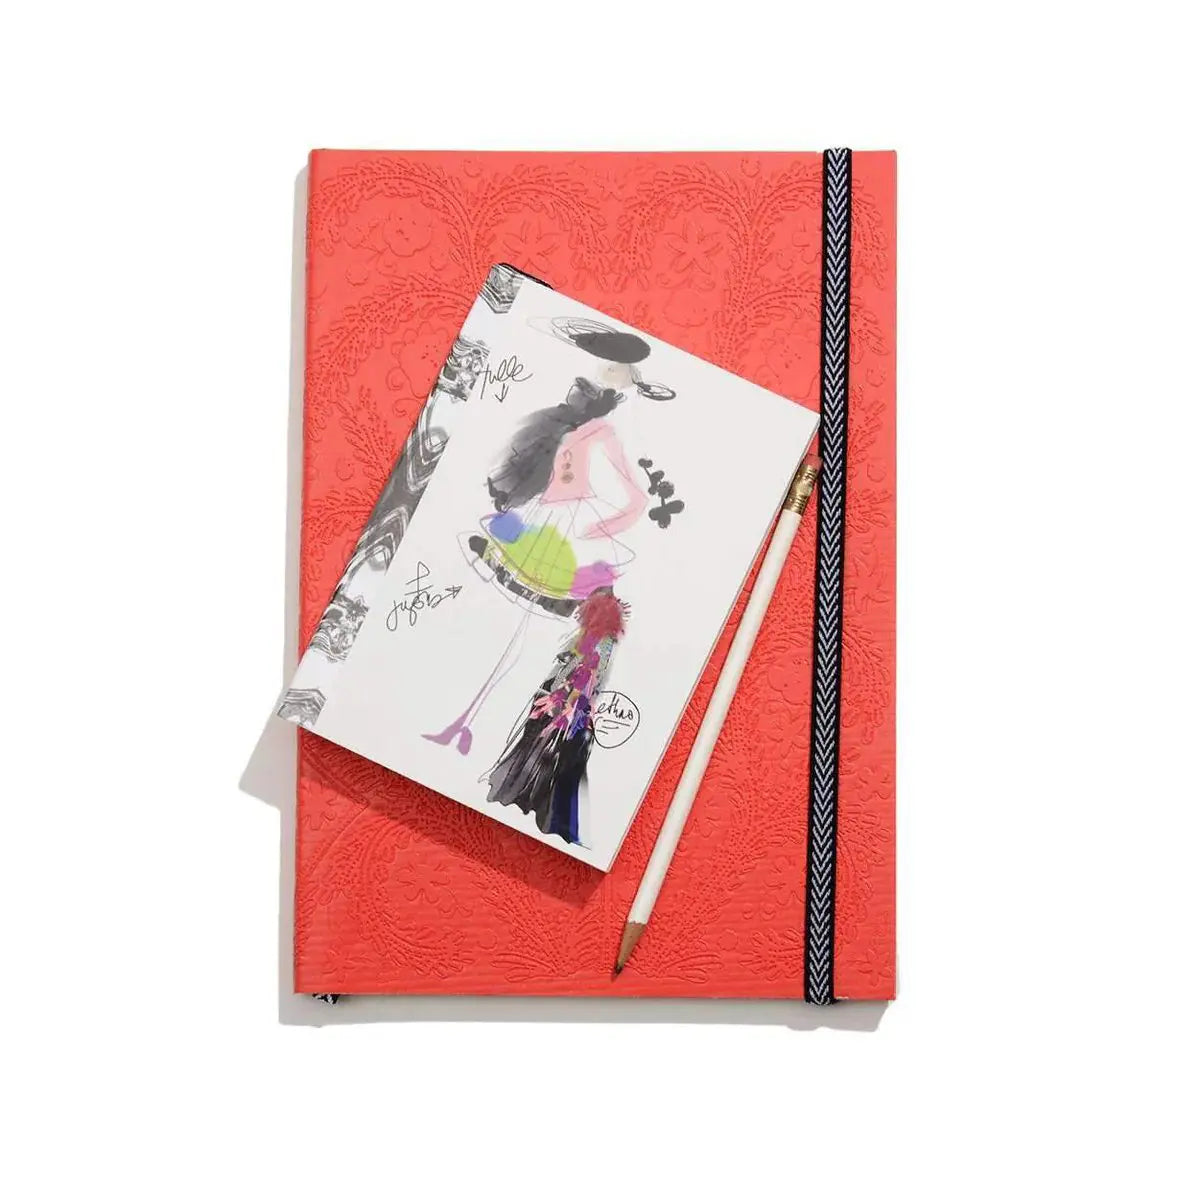 Hachette Christian Lacroix Croquis Fashion A6 Sketch Notebook set on top of a large scarlet red Christian Lacroix Paseo Notebook